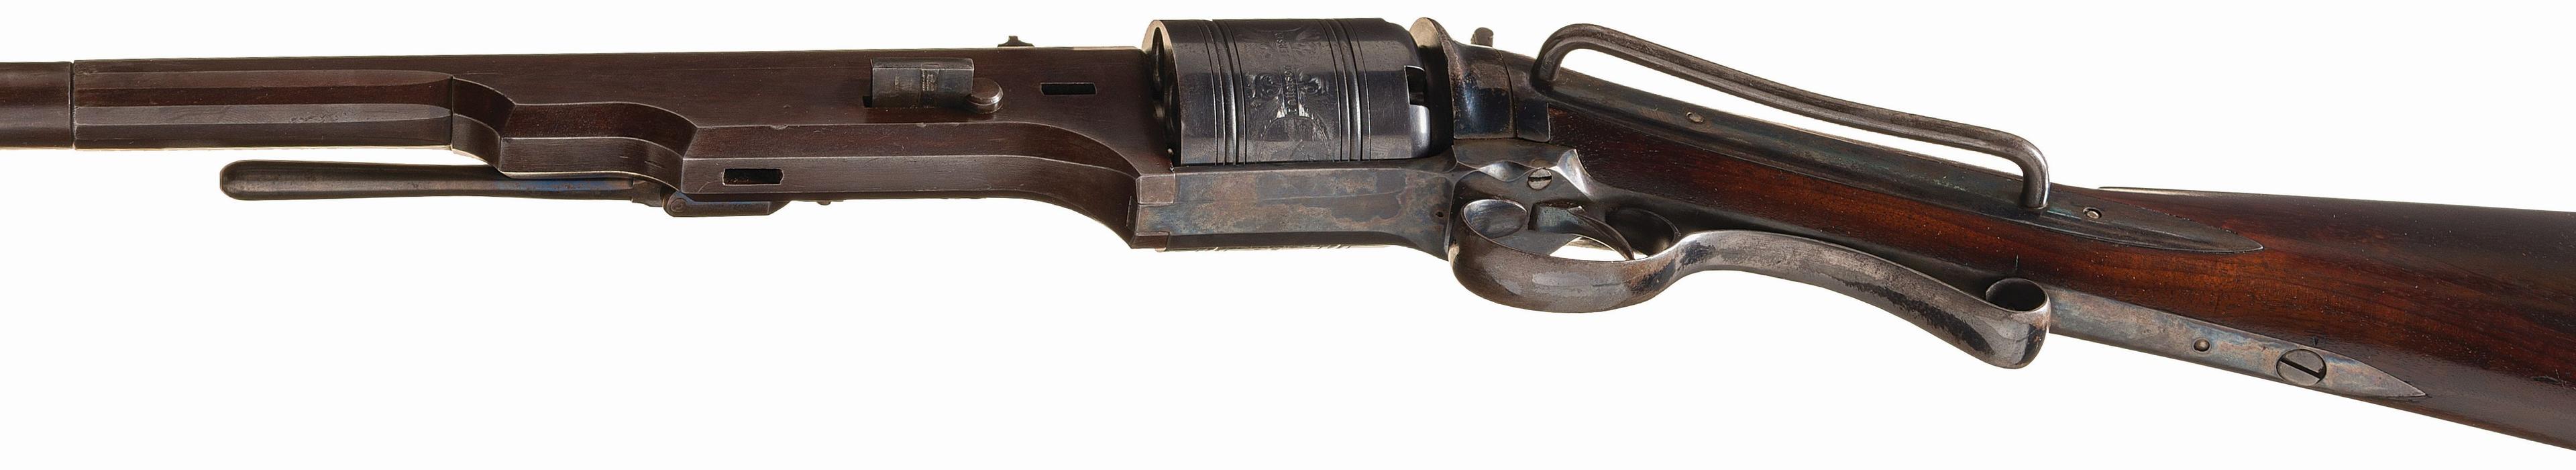 Colt Paterson Model 1839 Percussion Carbine with Sling Bar